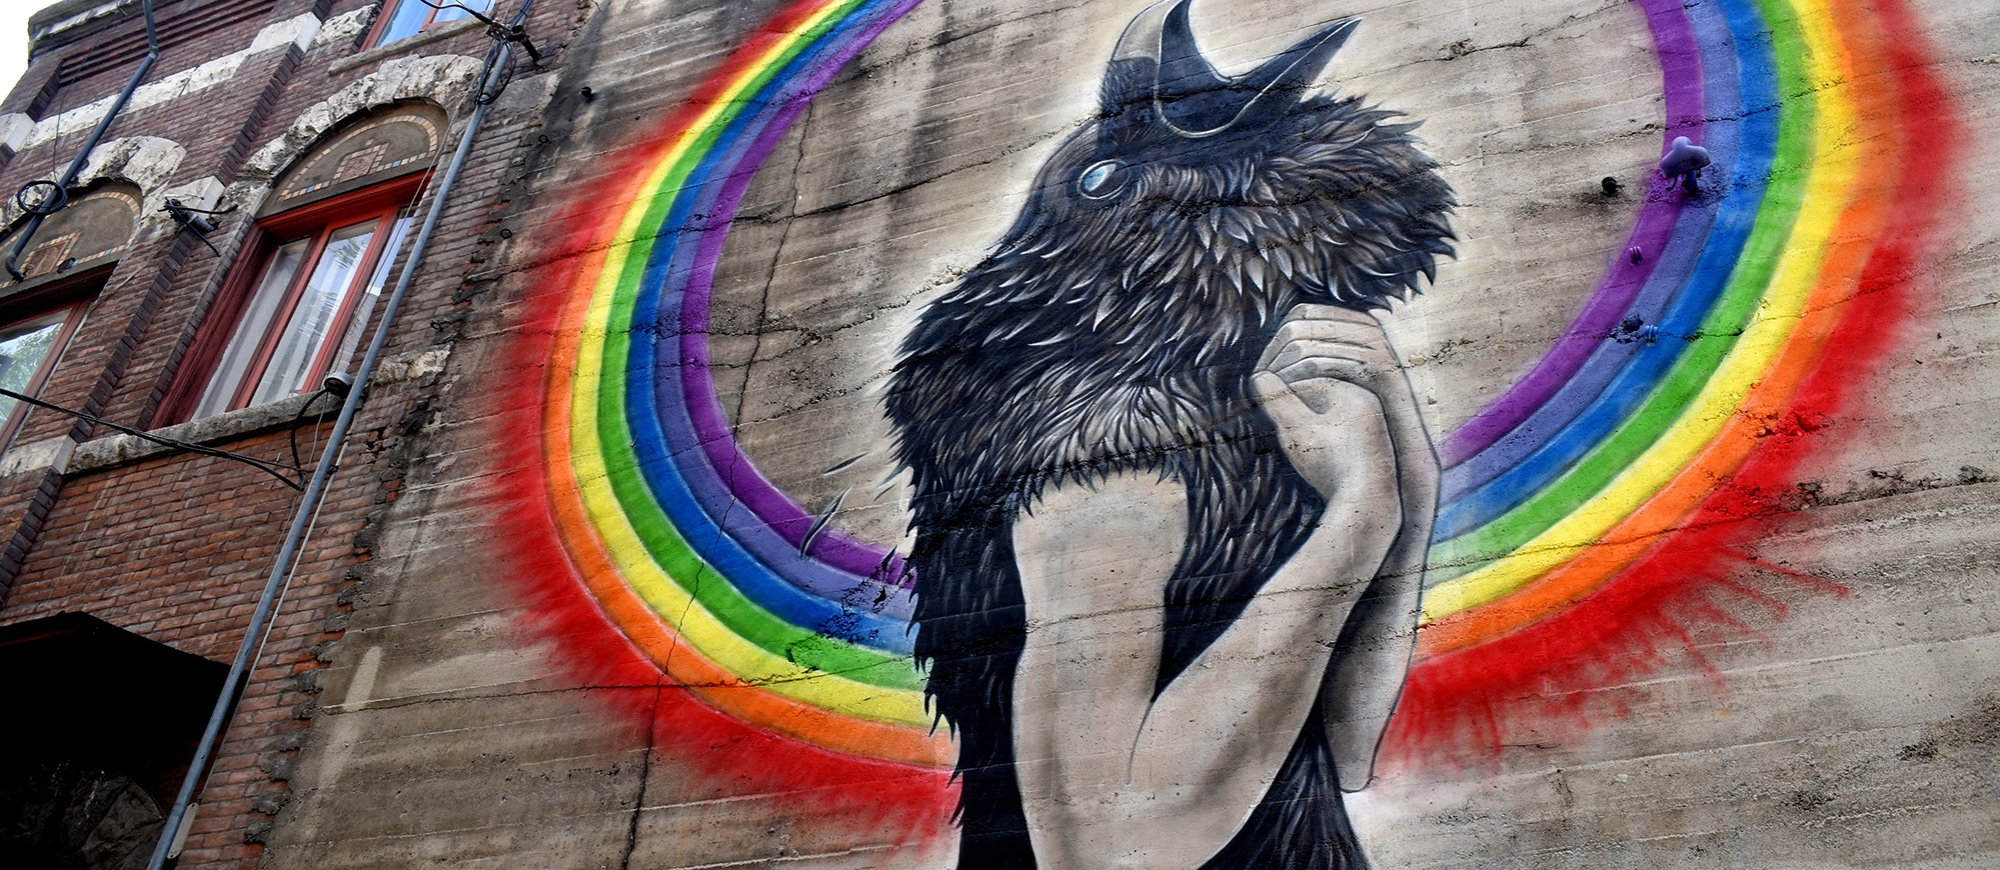 A mural  of a black bird head on a human's body from the Nelson BC Mural Festival